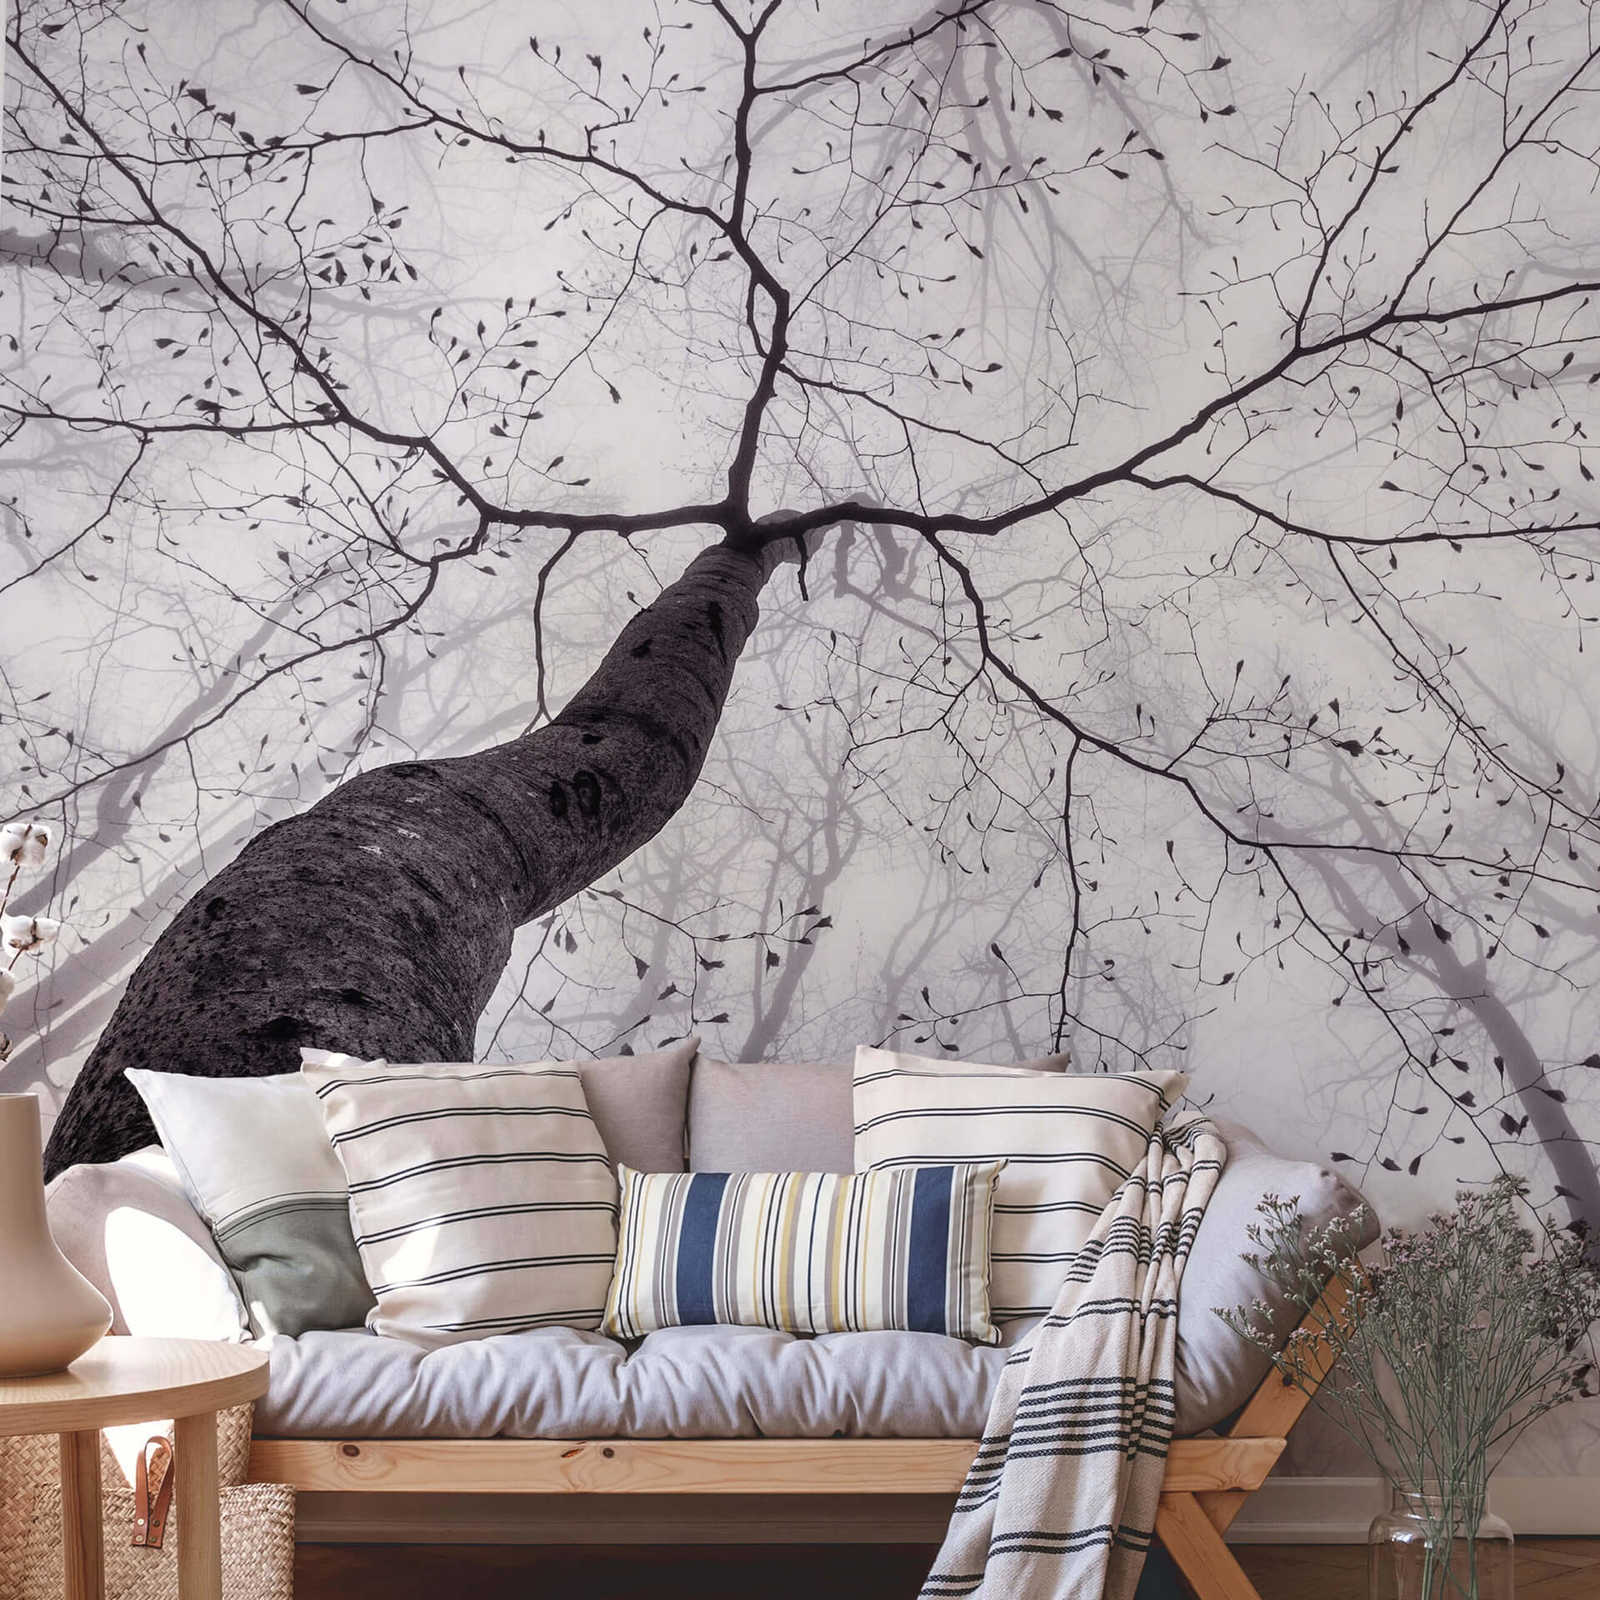             Nature mural treetops in the mist - grey, white
        